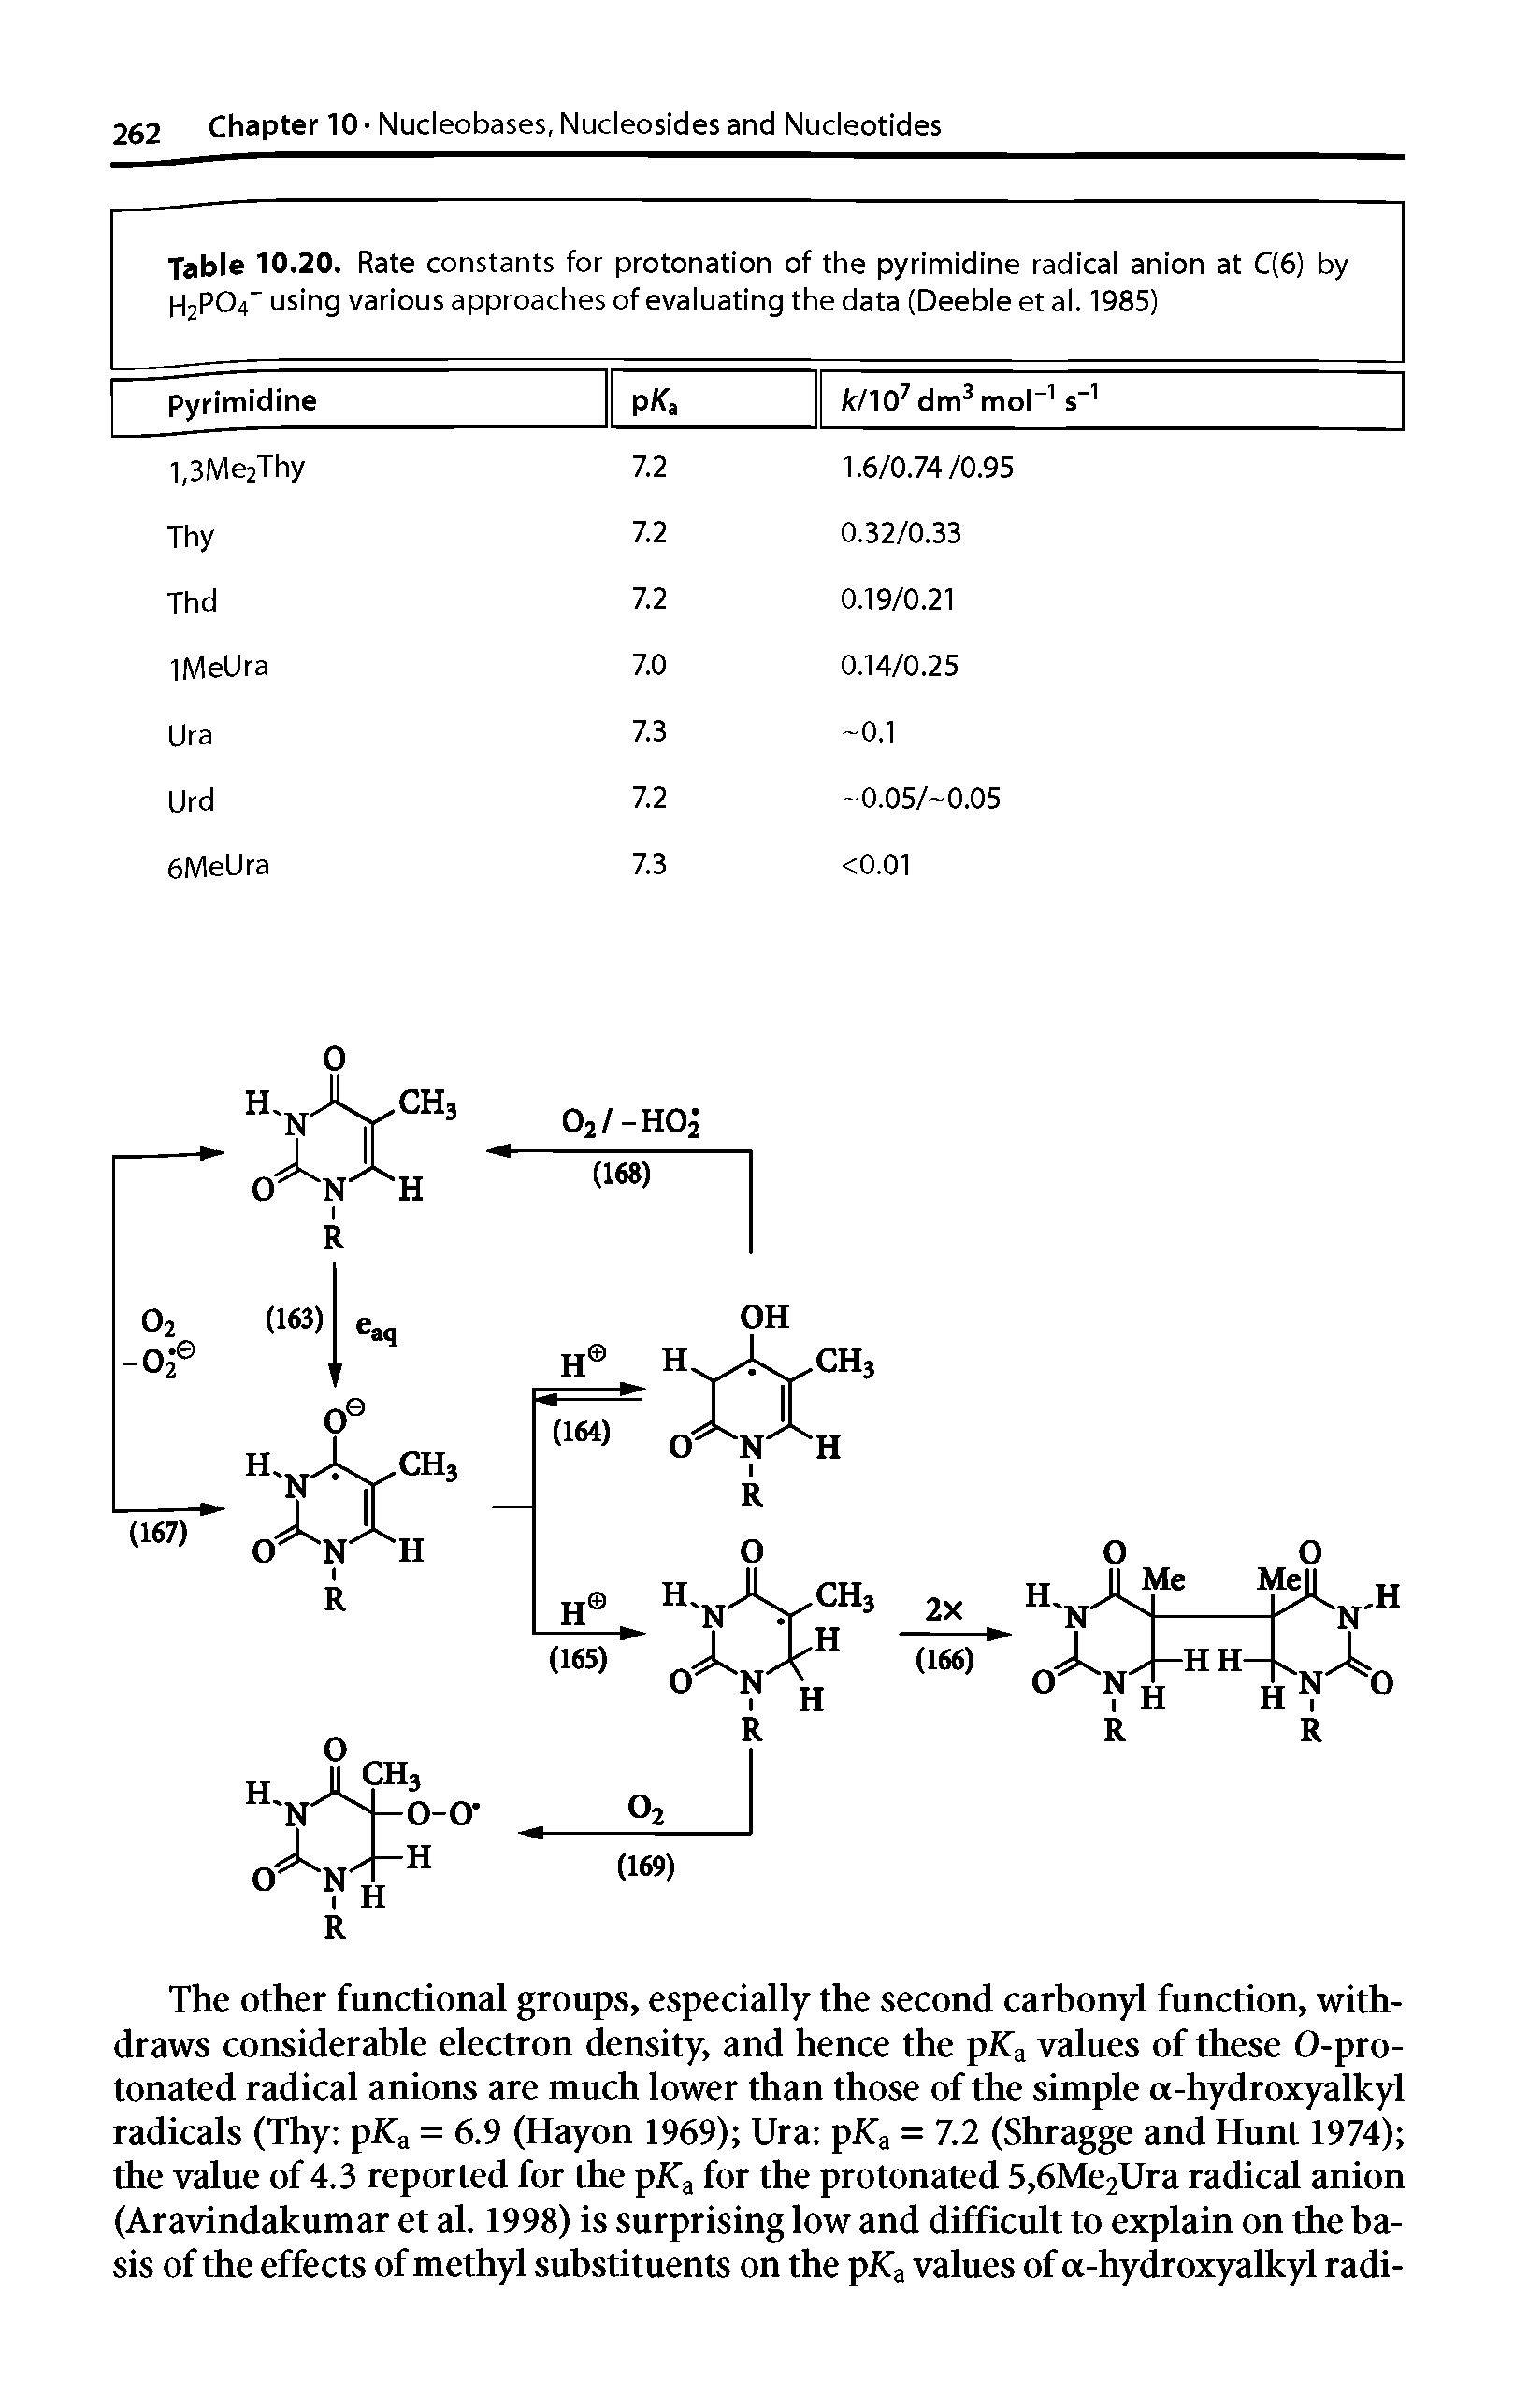 Table 10.20. Rate constants for protonation of the pyrimidine radical anion at C(6) by H2P04 using various approaches of evaluating the data (Deeble et al. 1985) ...